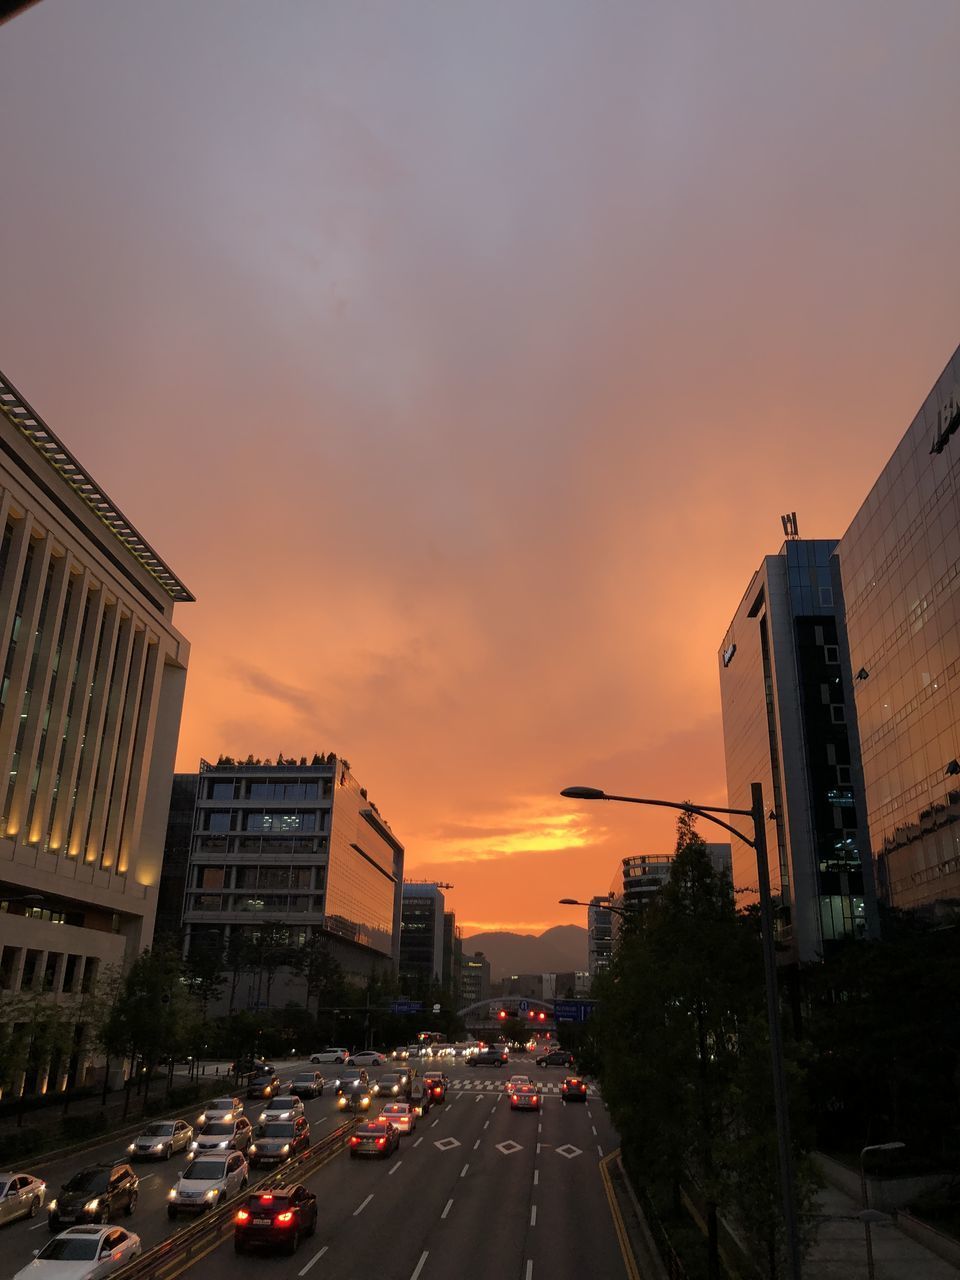 VIEW OF CITY STREET AND BUILDINGS AGAINST SKY DURING SUNSET